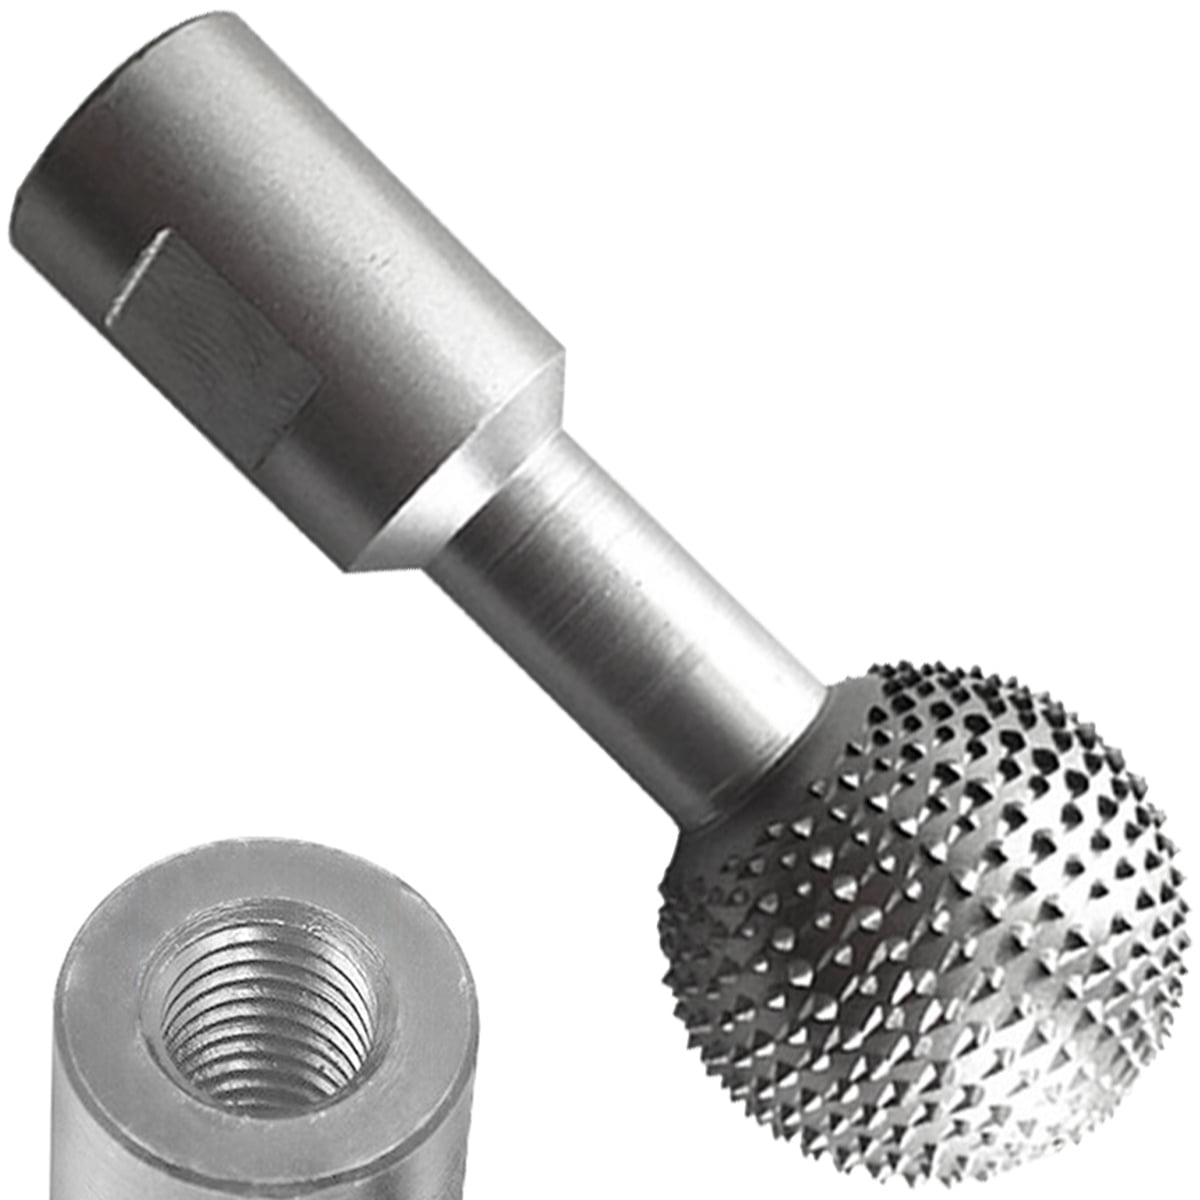 Spherical Steel Rotary File,Sphere Rotary Burr,Rotary Grinding Head Engraving Woodworking Hand Tool,Replacement Parts for Angle Grinder Drilling Bits 